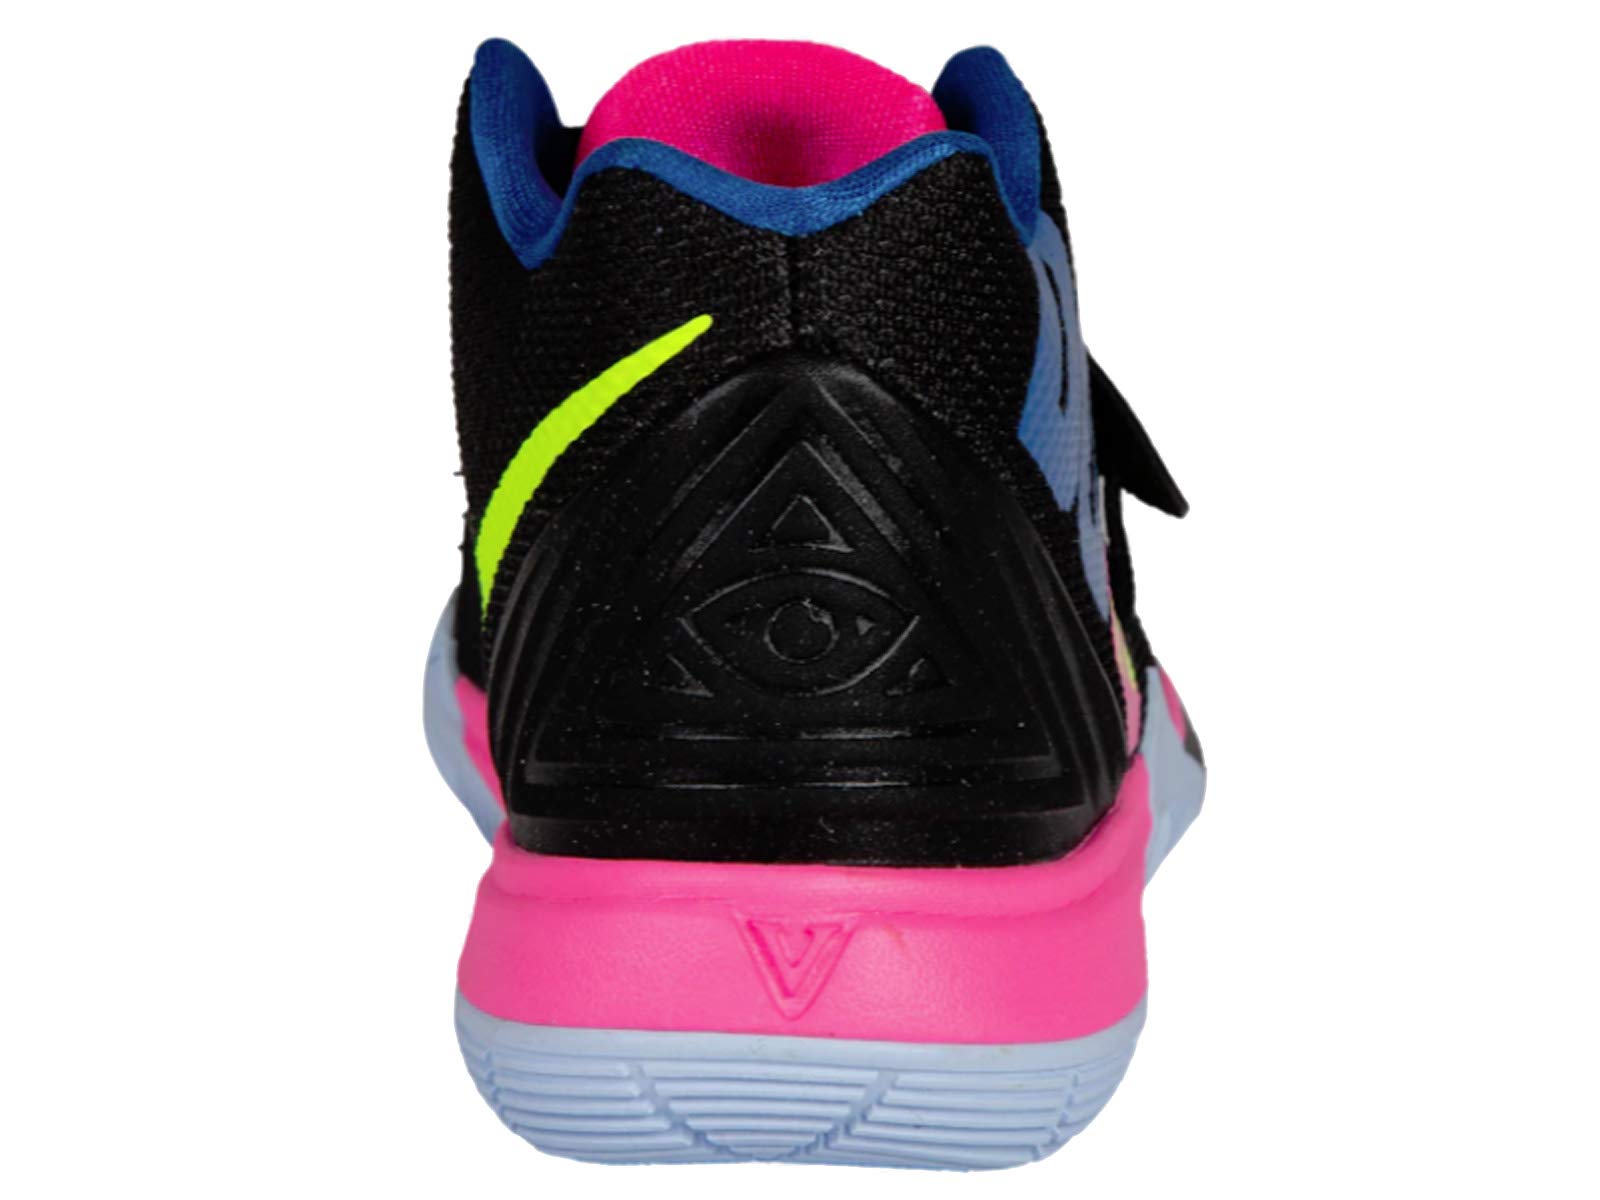 Nike Mens Kyrie 5 Basketball Shoes (12) - image 5 of 5